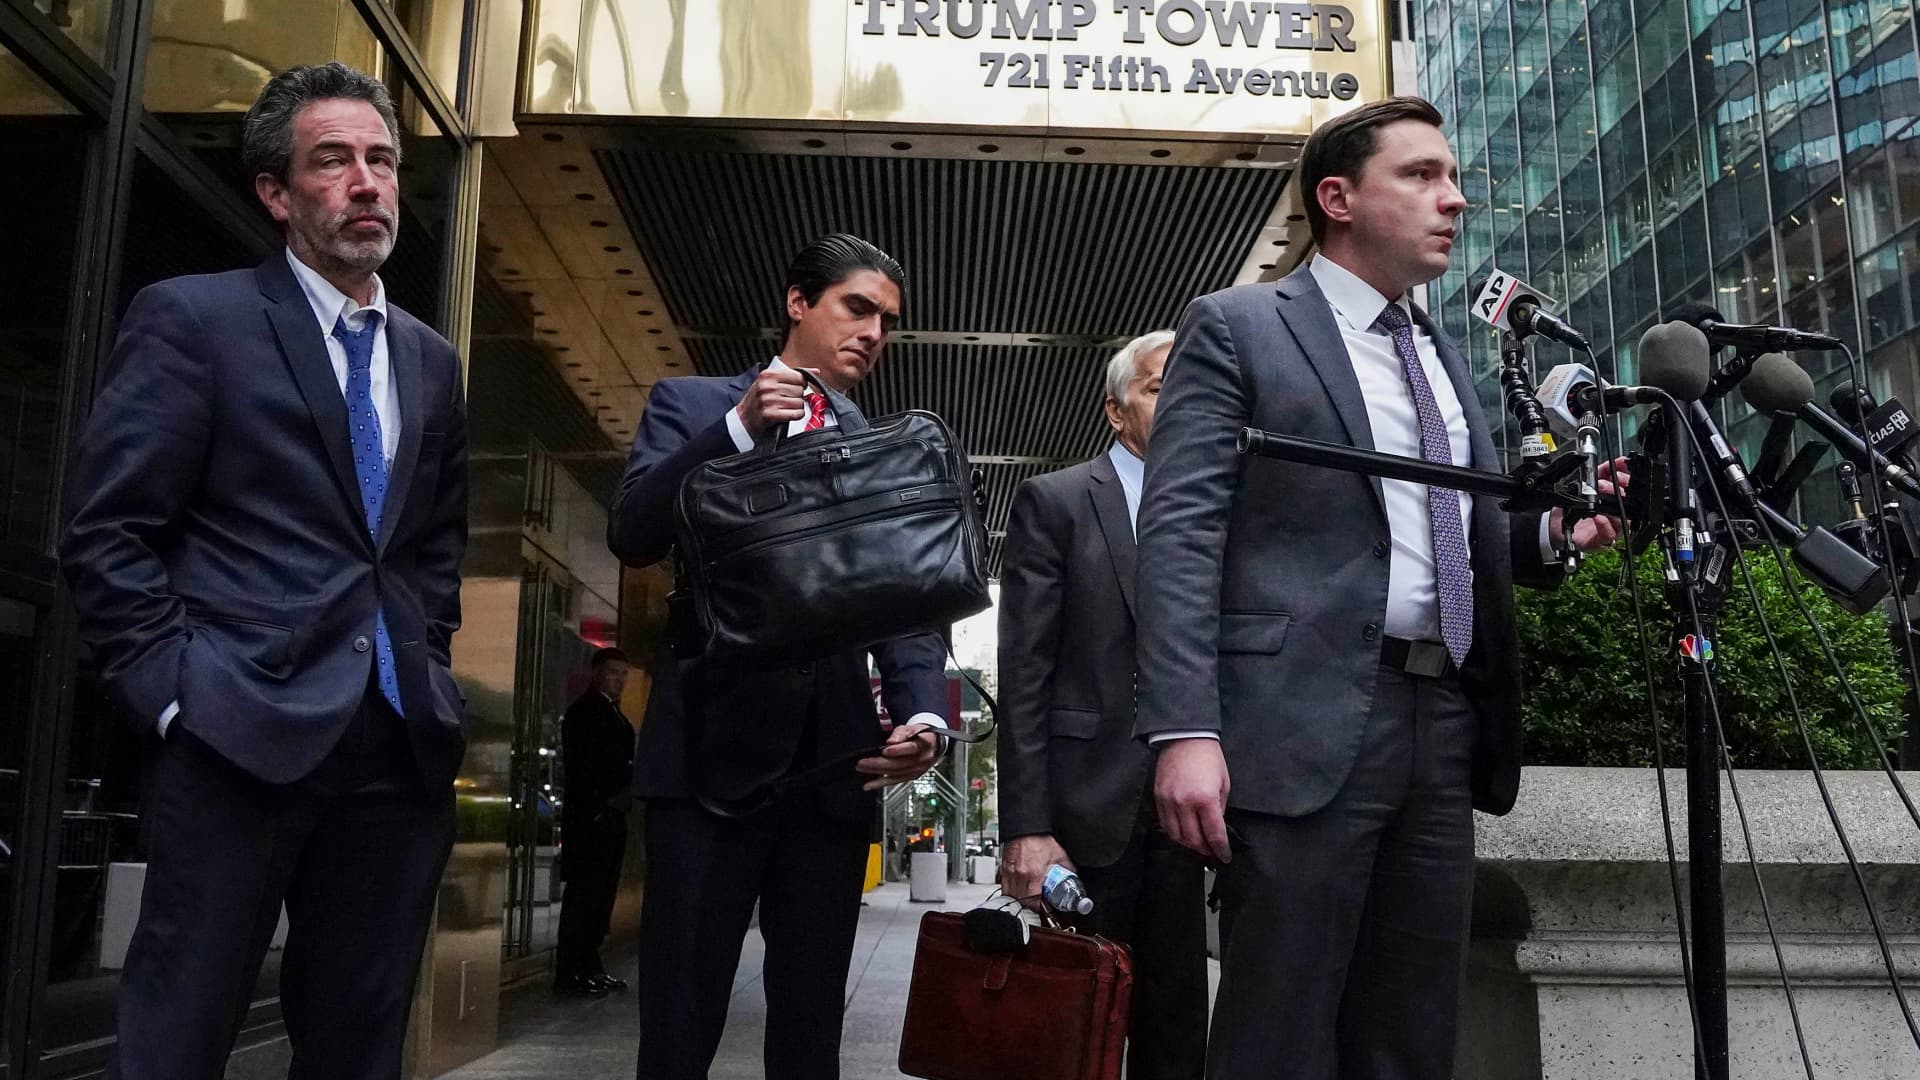 Plaintiff's lawyer Benjamin Dictor speaks to the media outside Trump Tower on the day that former U.S. President Donald Trump was deposed in the Manhattan borough of New York City, New York, October 18, 2021.